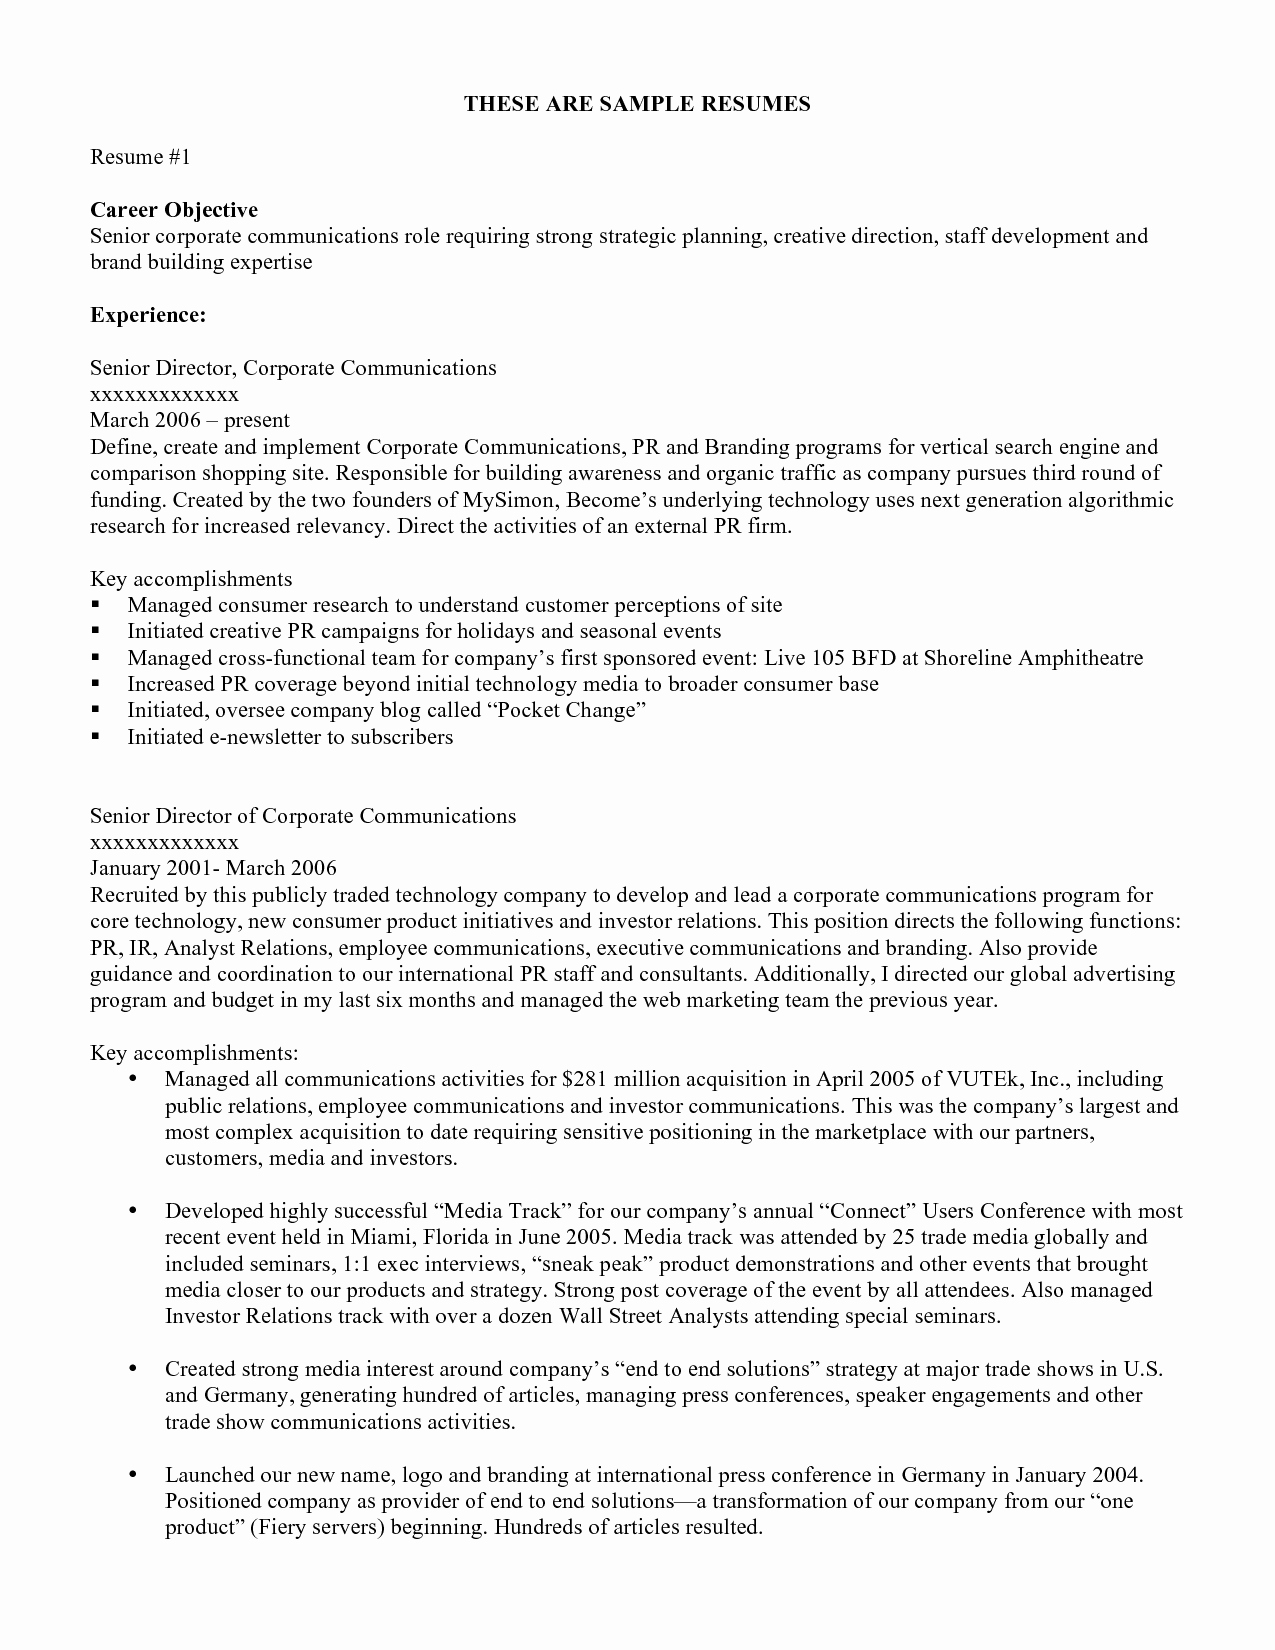 Simple Objective for Resume Luxury Basic Resume Objective Examples with Resume Skills Example